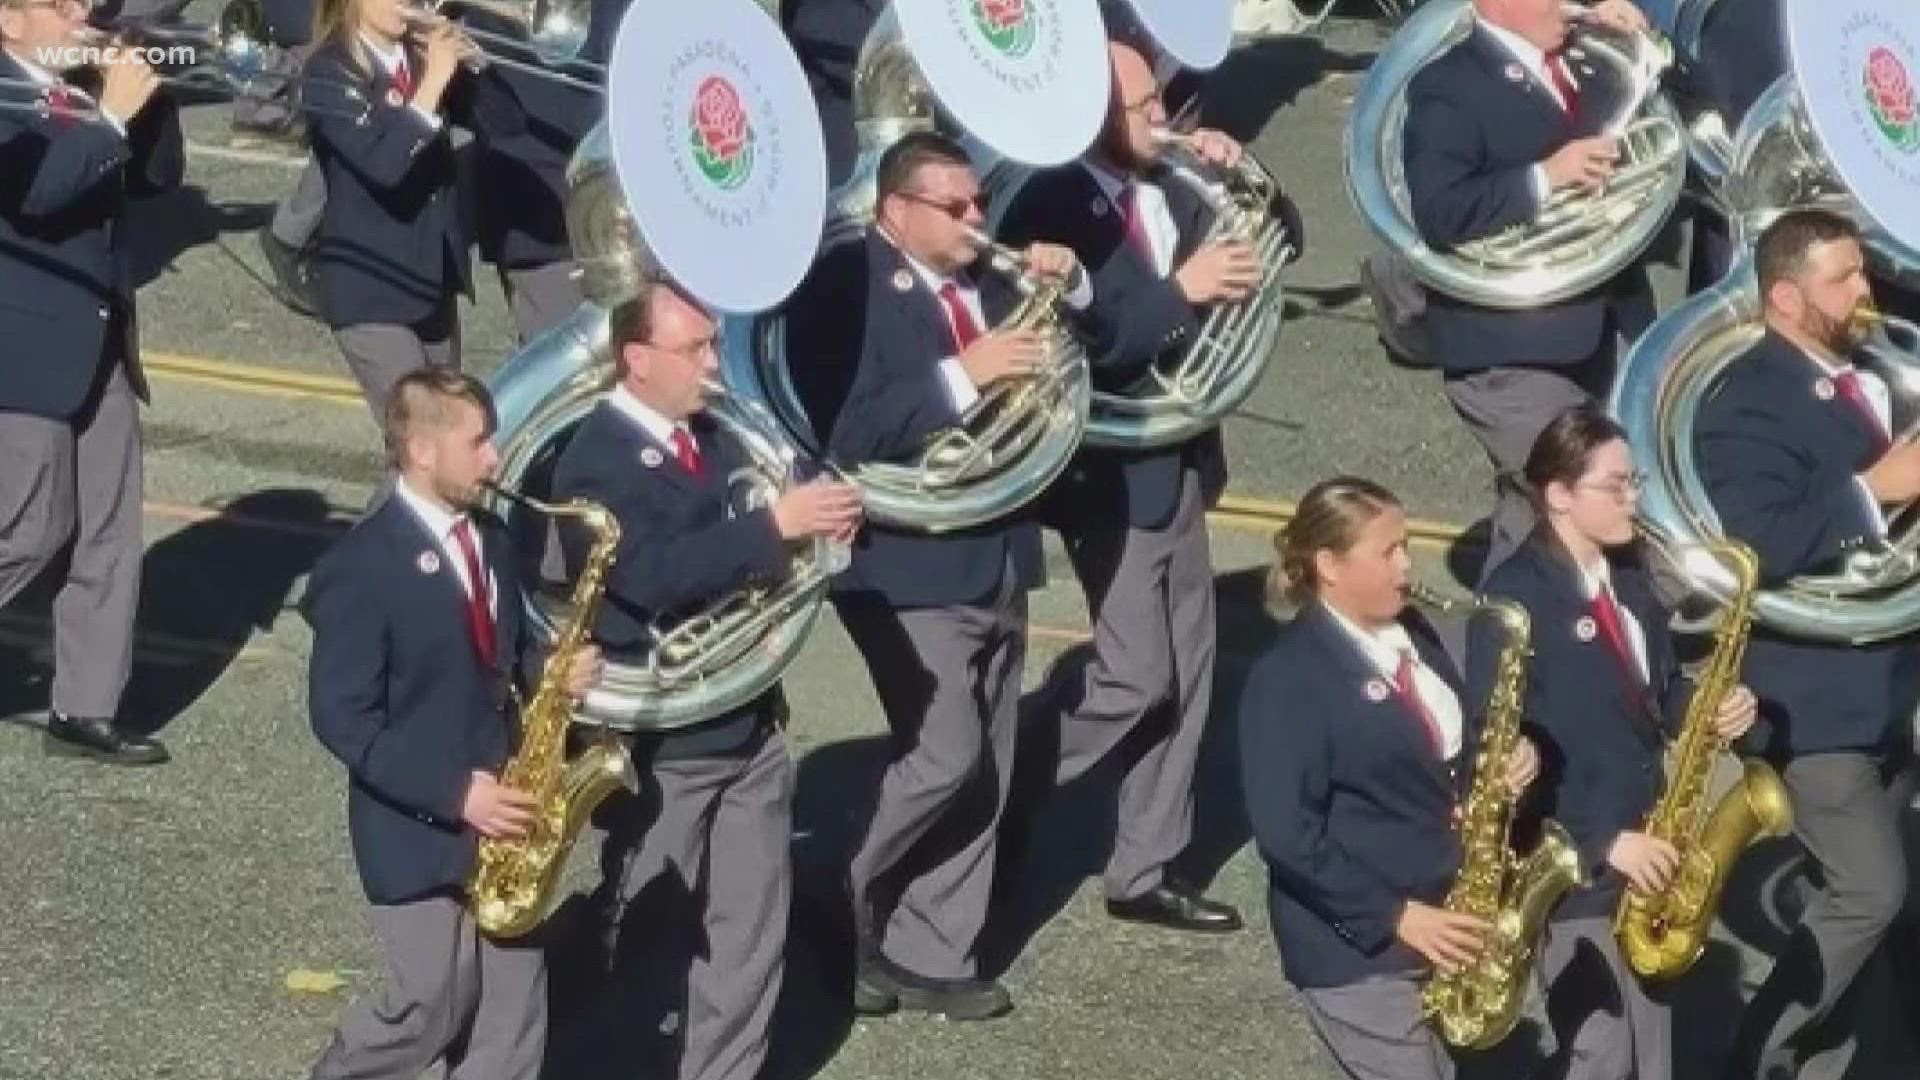 James Turner works at South Pointe High School and recently had the opportunity to march in the Rose Parade on Saturday, Jan. 1, in California.